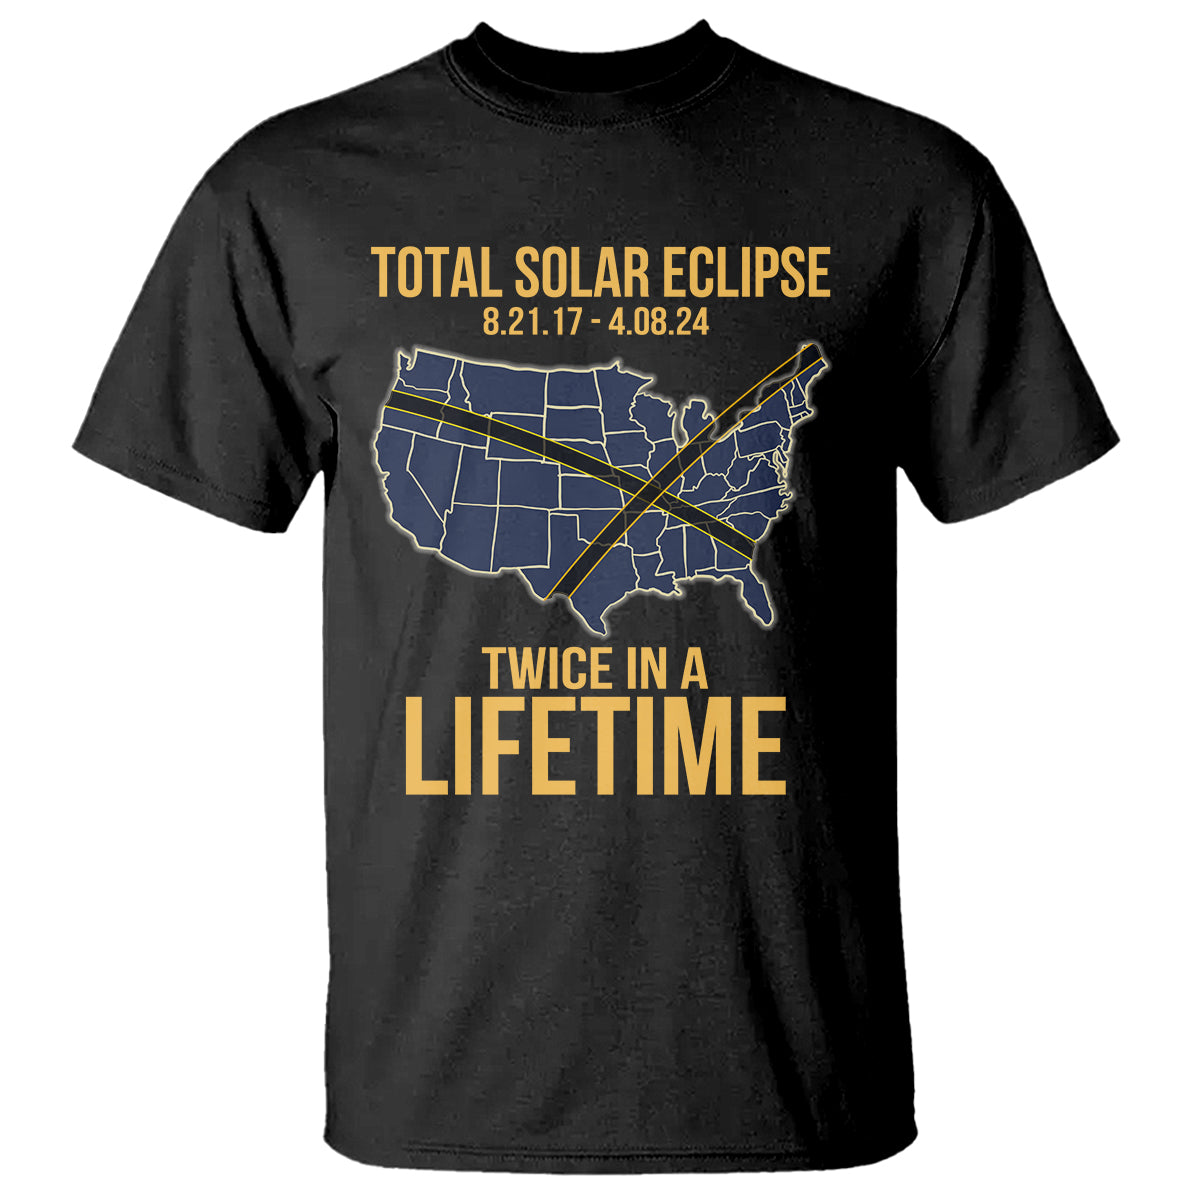 Total Solar Eclipse T Shirt Twice In A Life Time Tour Map American Totality 2024 2017 TS02 Black Printyourwear